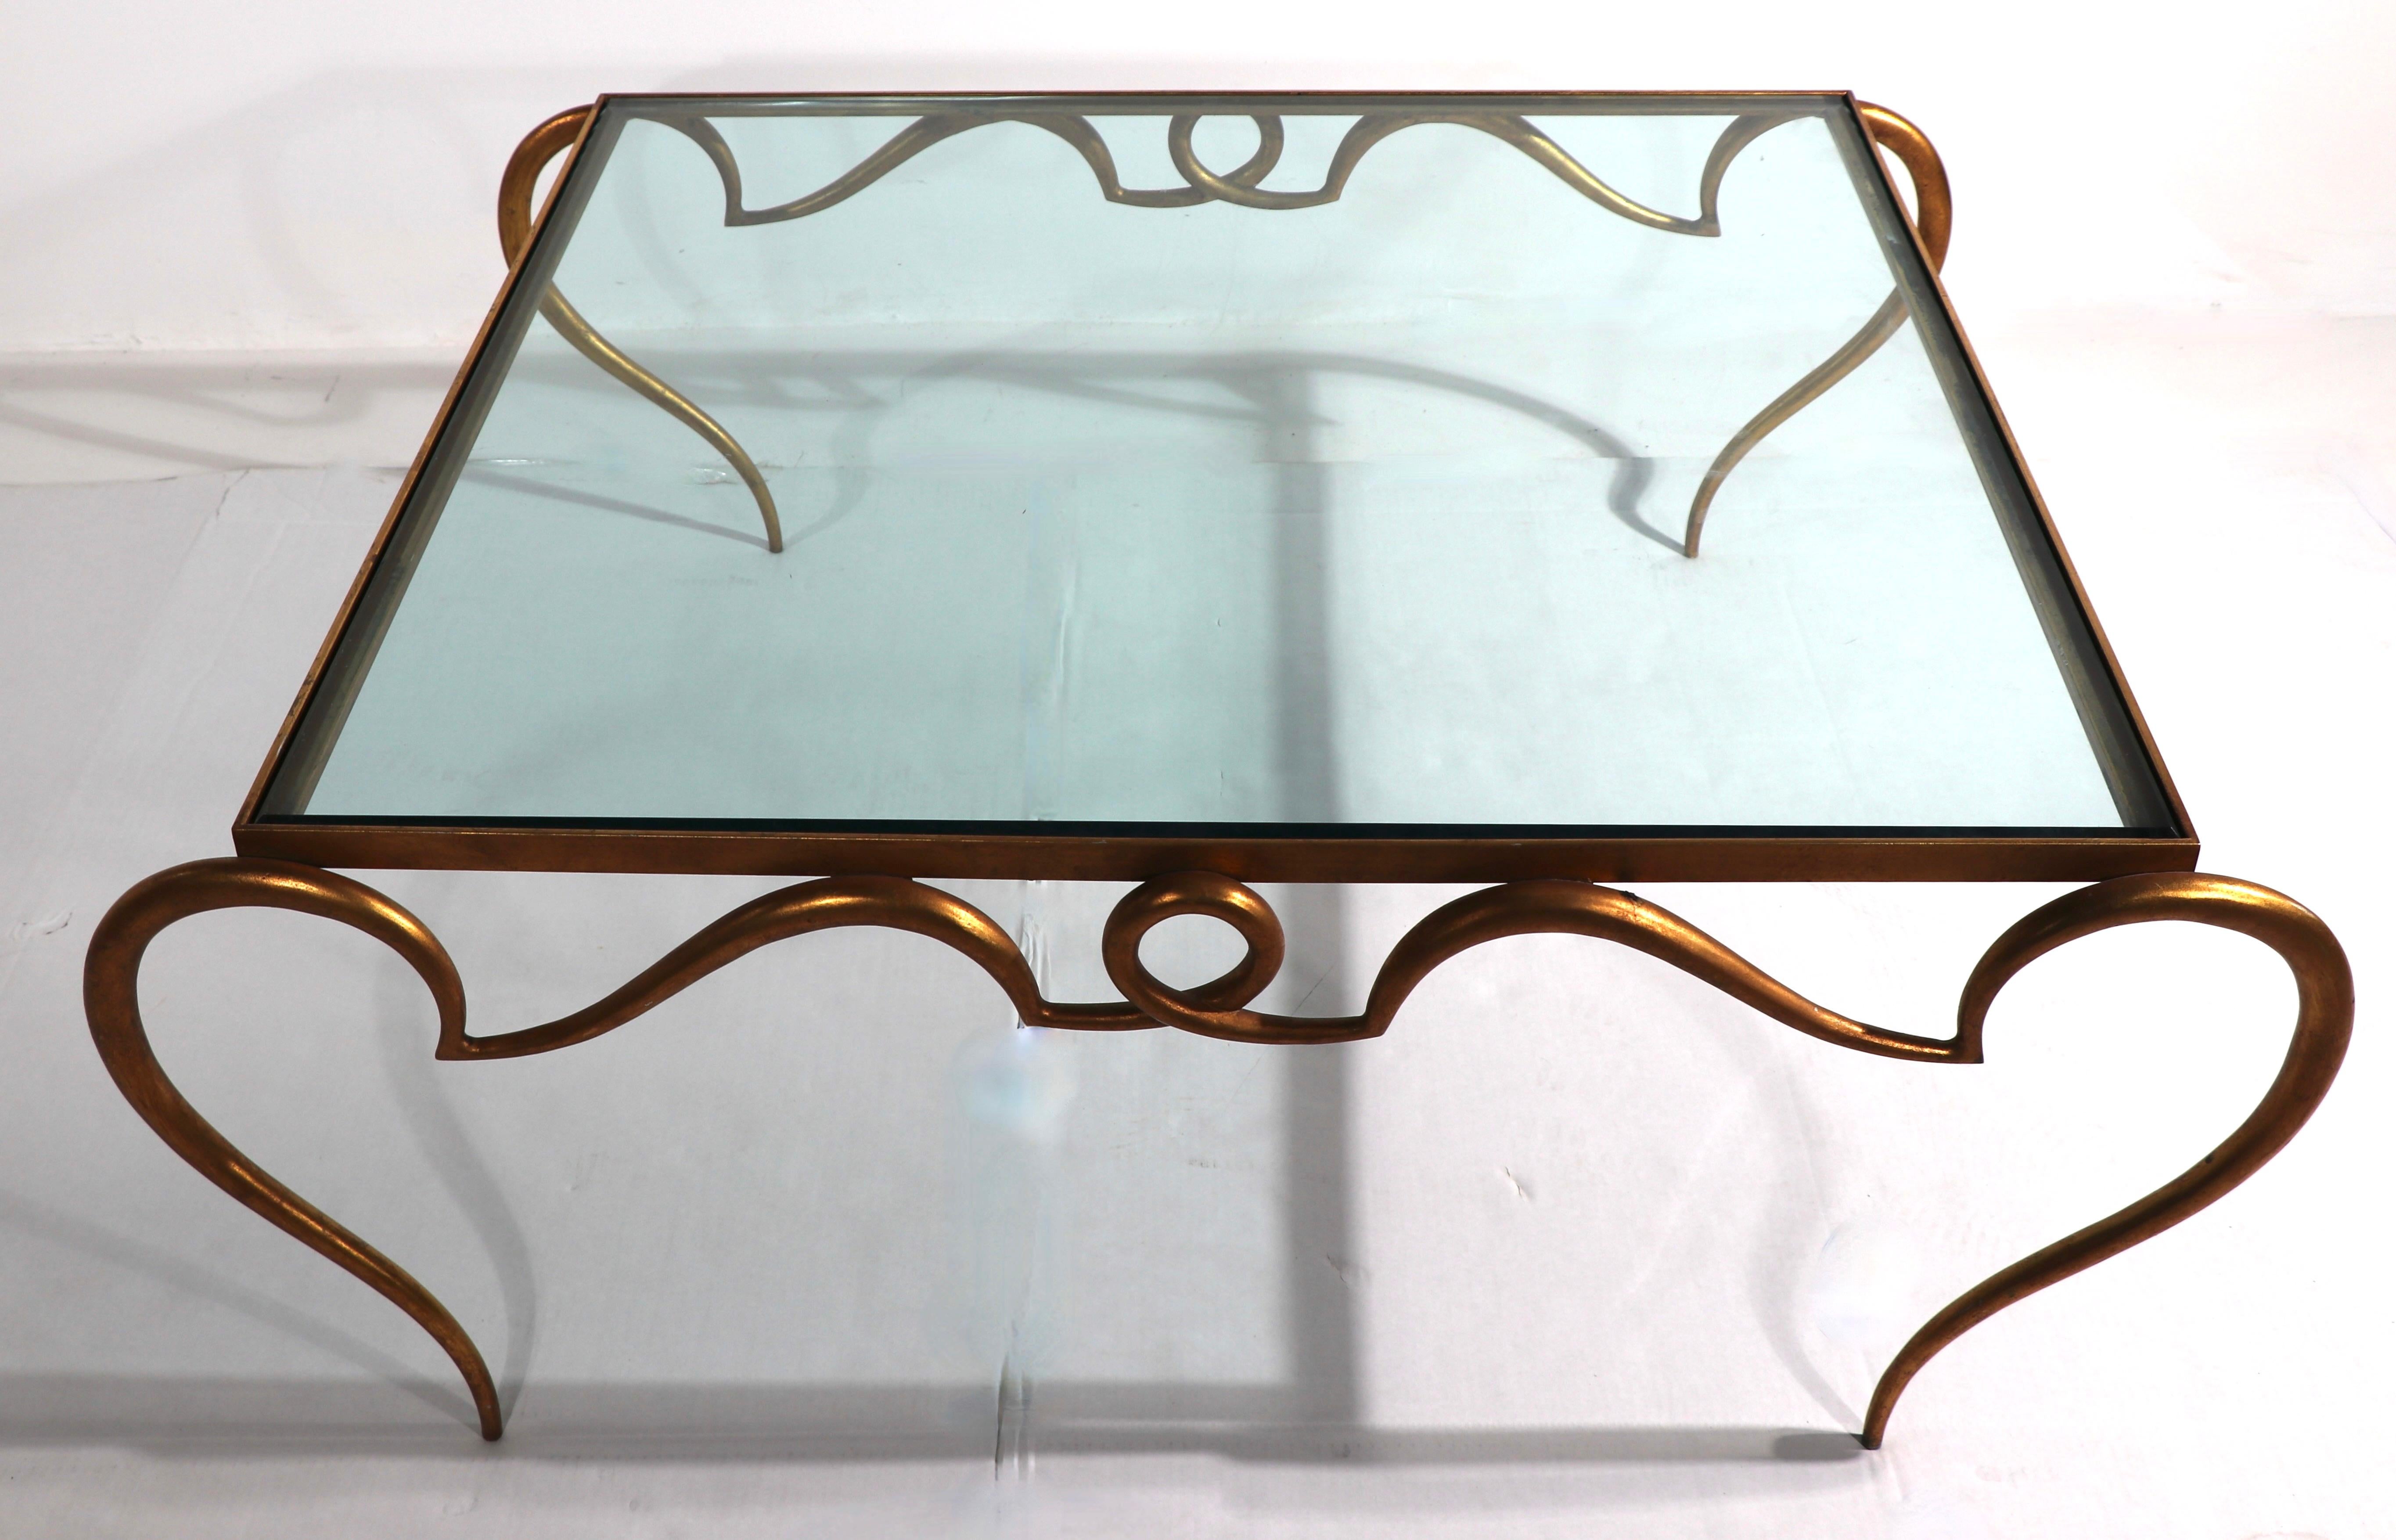 Faux Gilt Metal Scrollwork and Glass Coffee Table att. to Rene Drouet For Sale 5